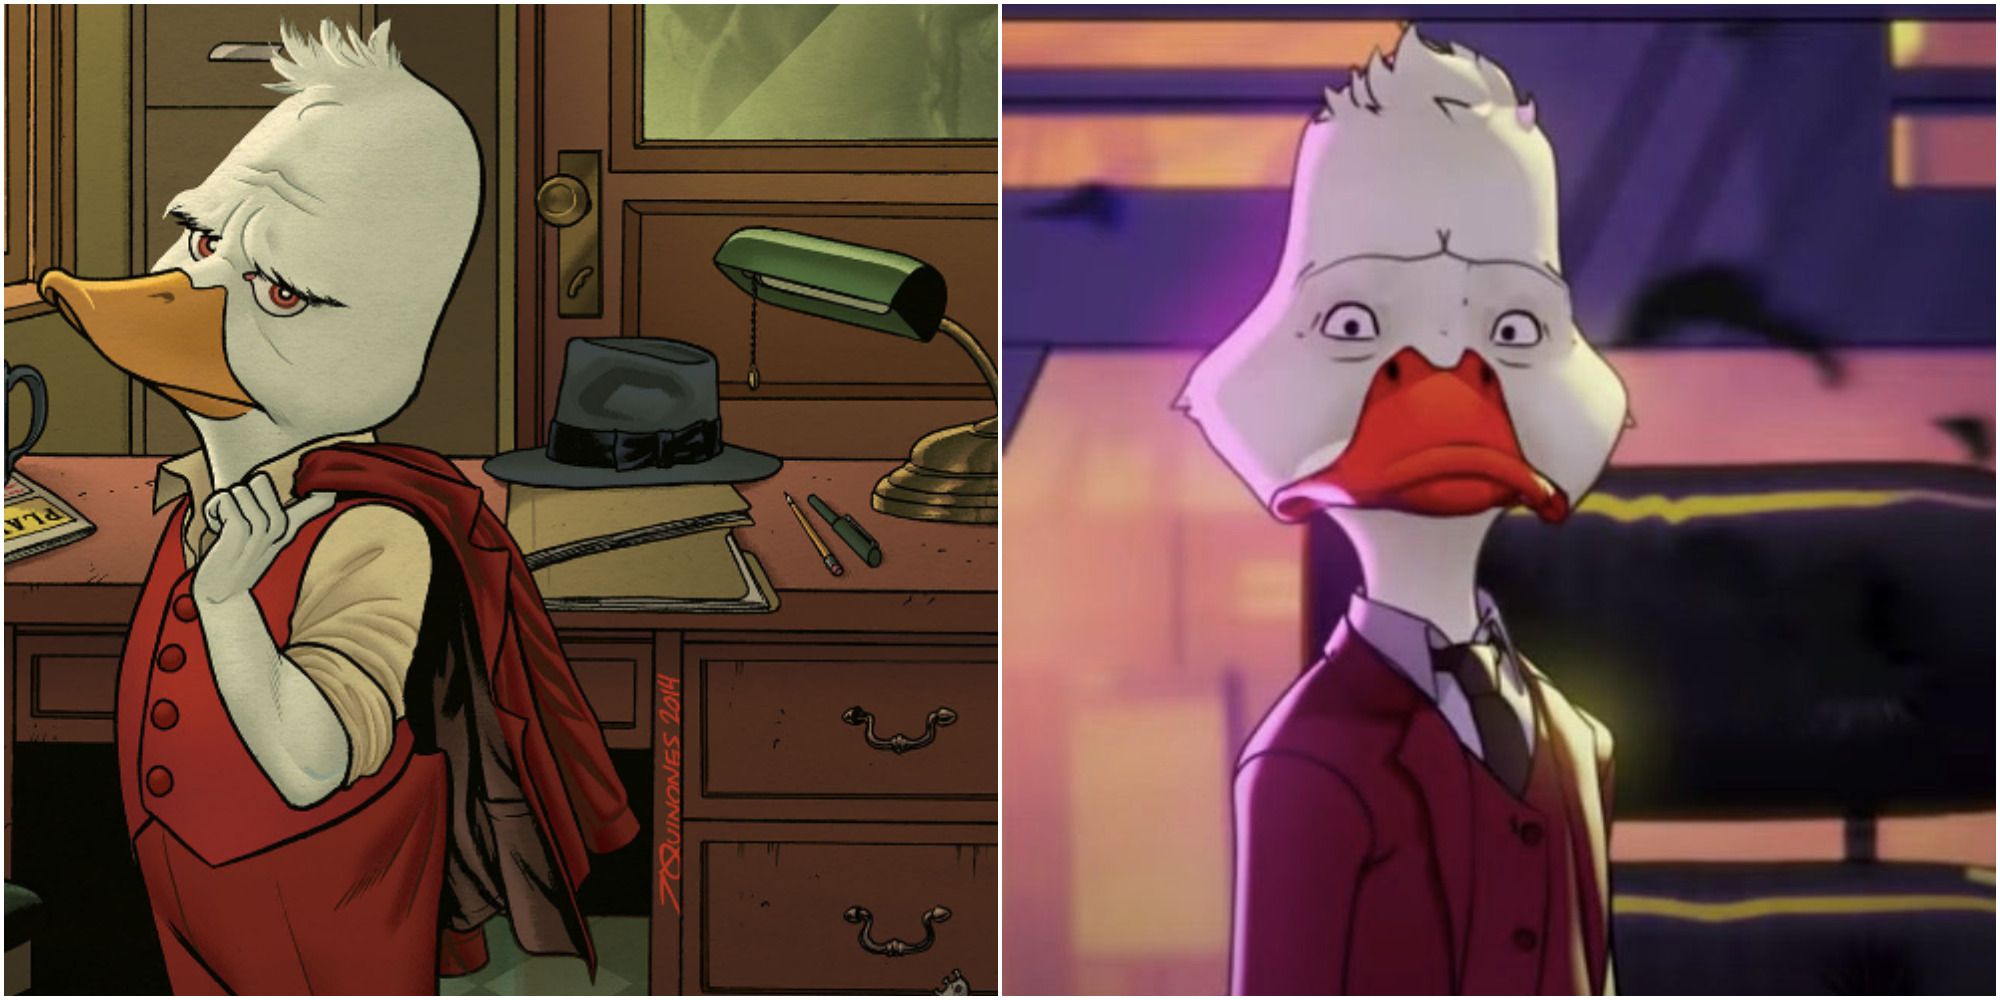 Howard The Duck as he appears in recent comics and the What If Marvel Cinematic Universe animated series